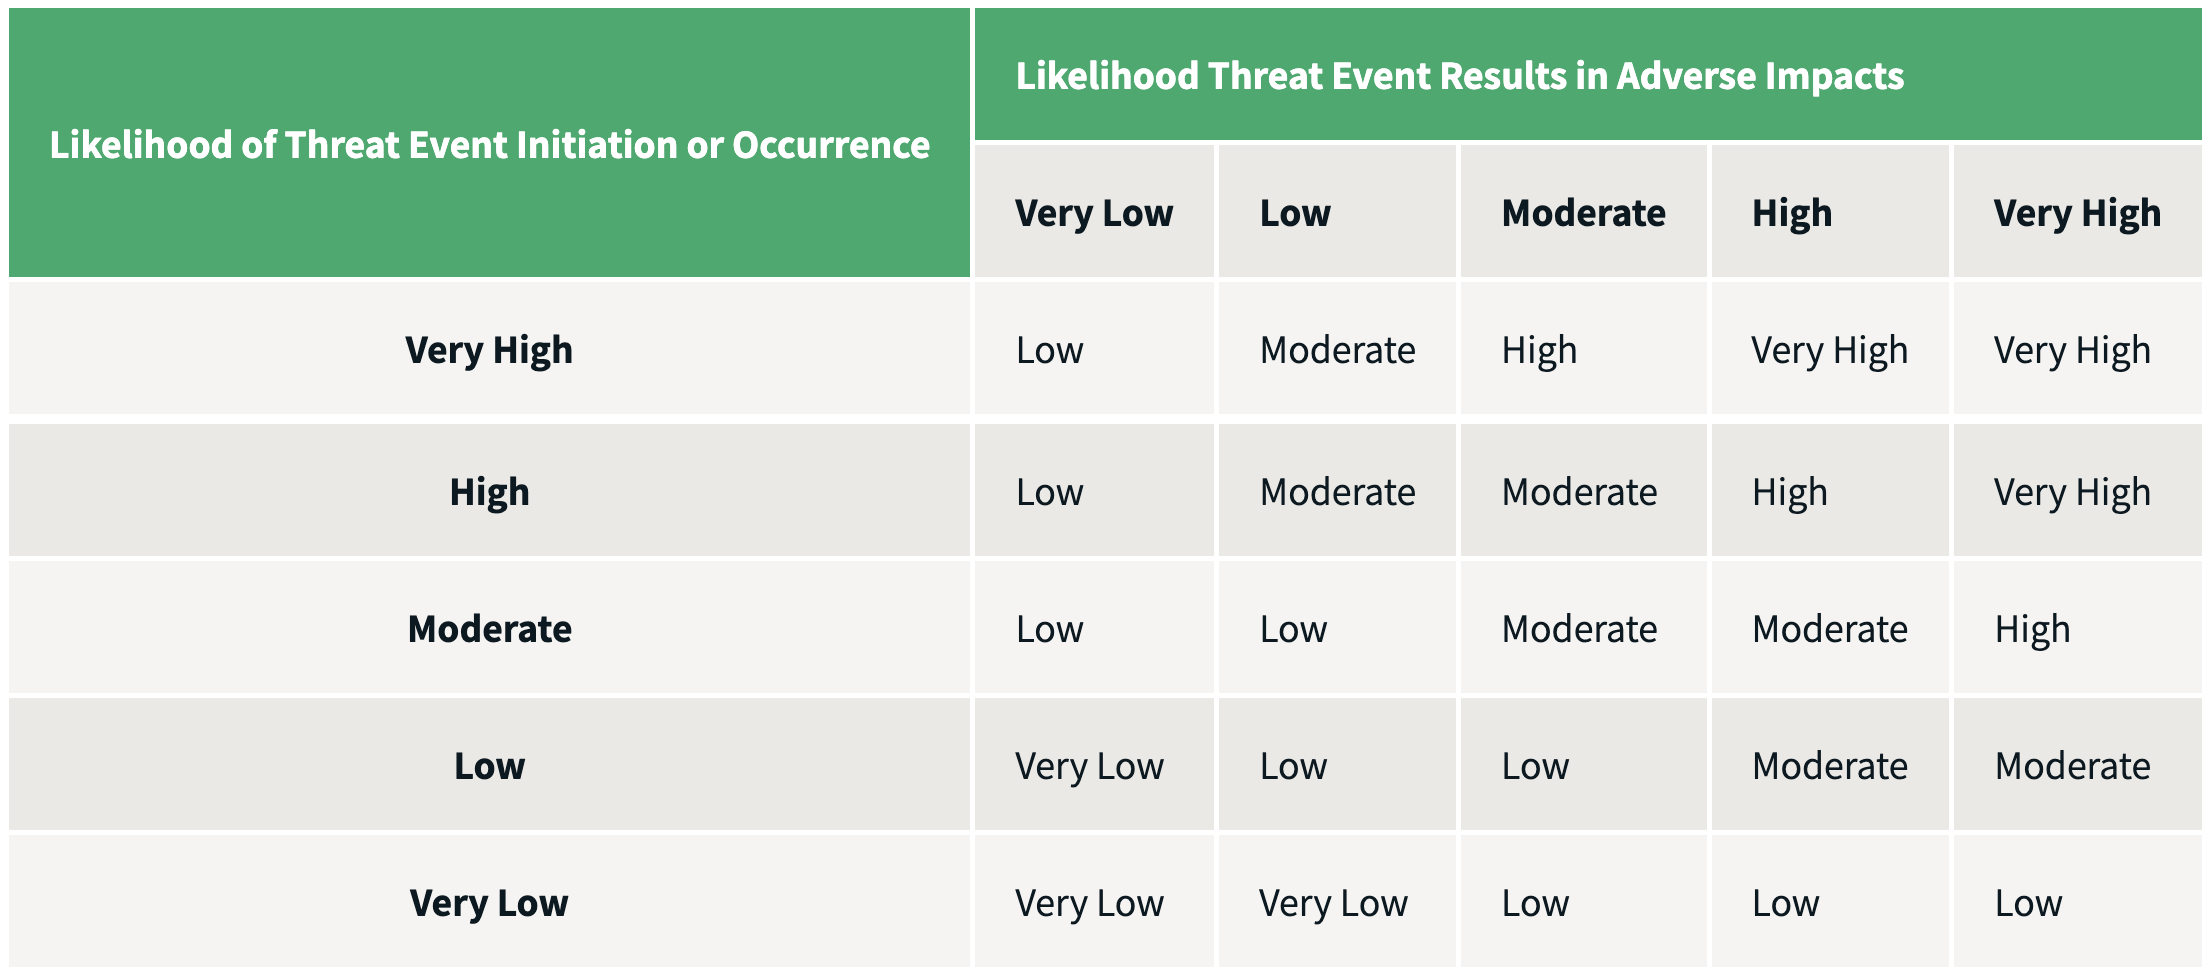 Risk assessment of overall likelihood of events